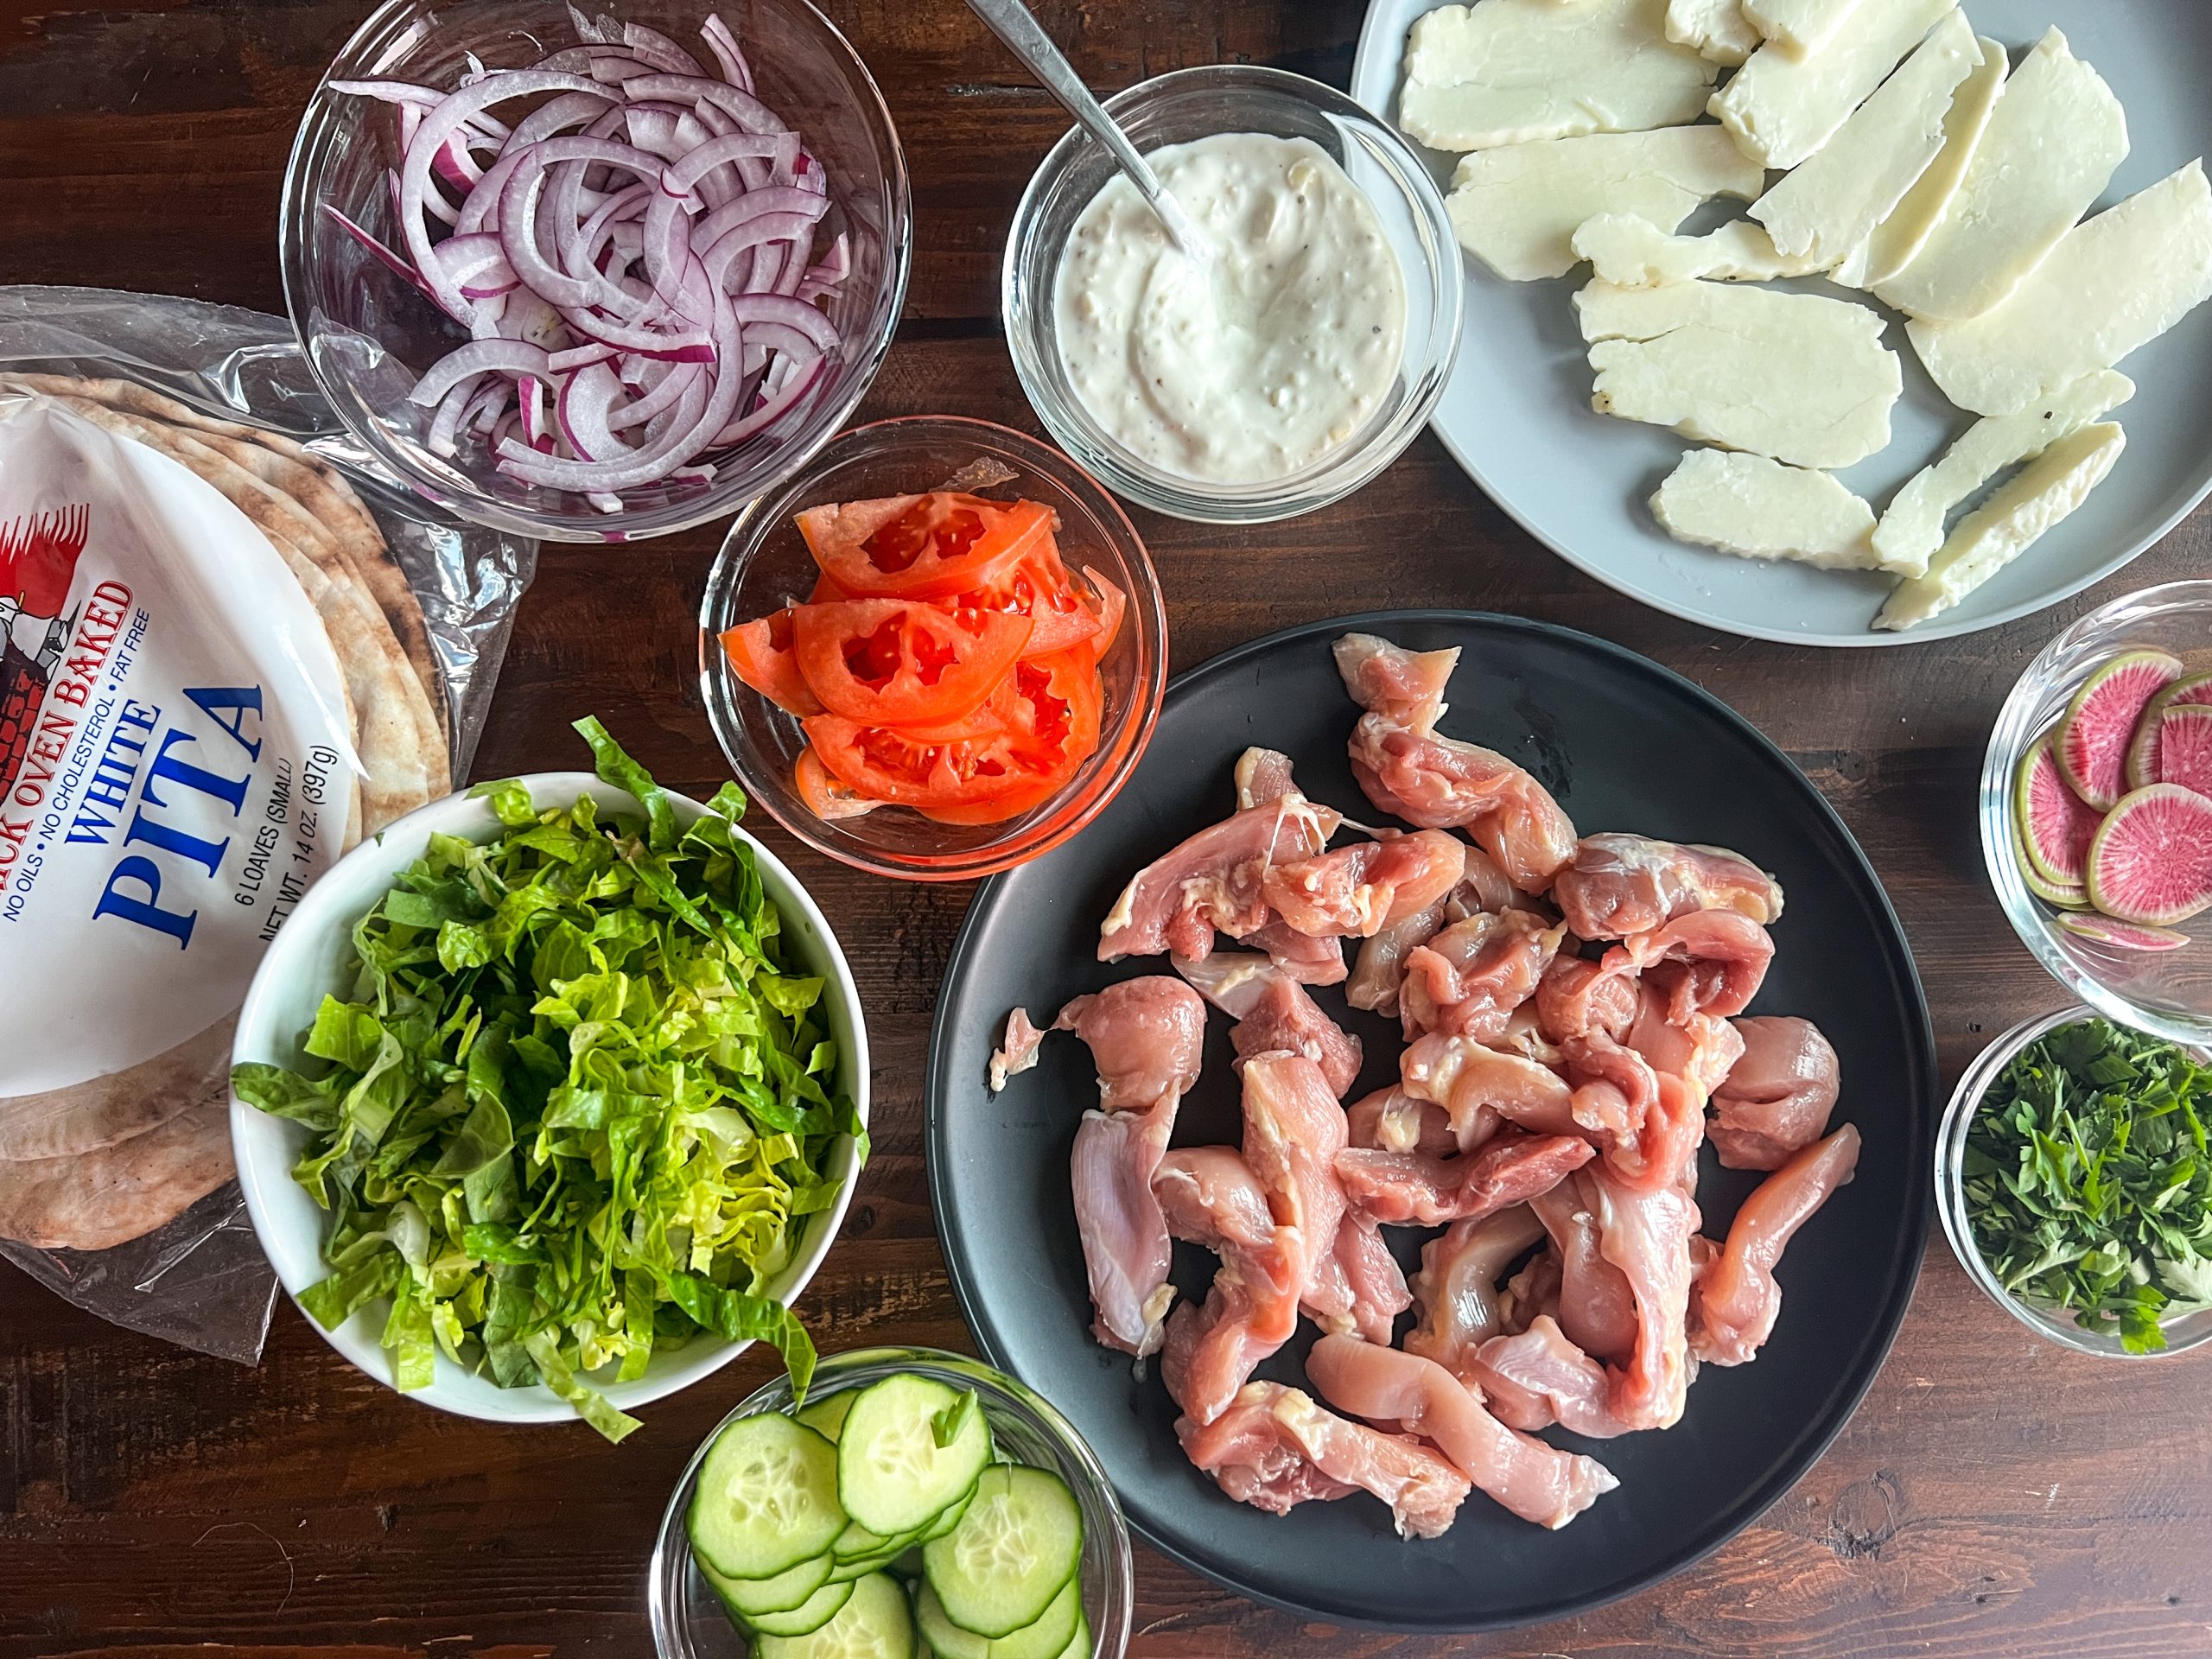 All of the ingredients to make the pitas - everything can be found at Rollin' Oats